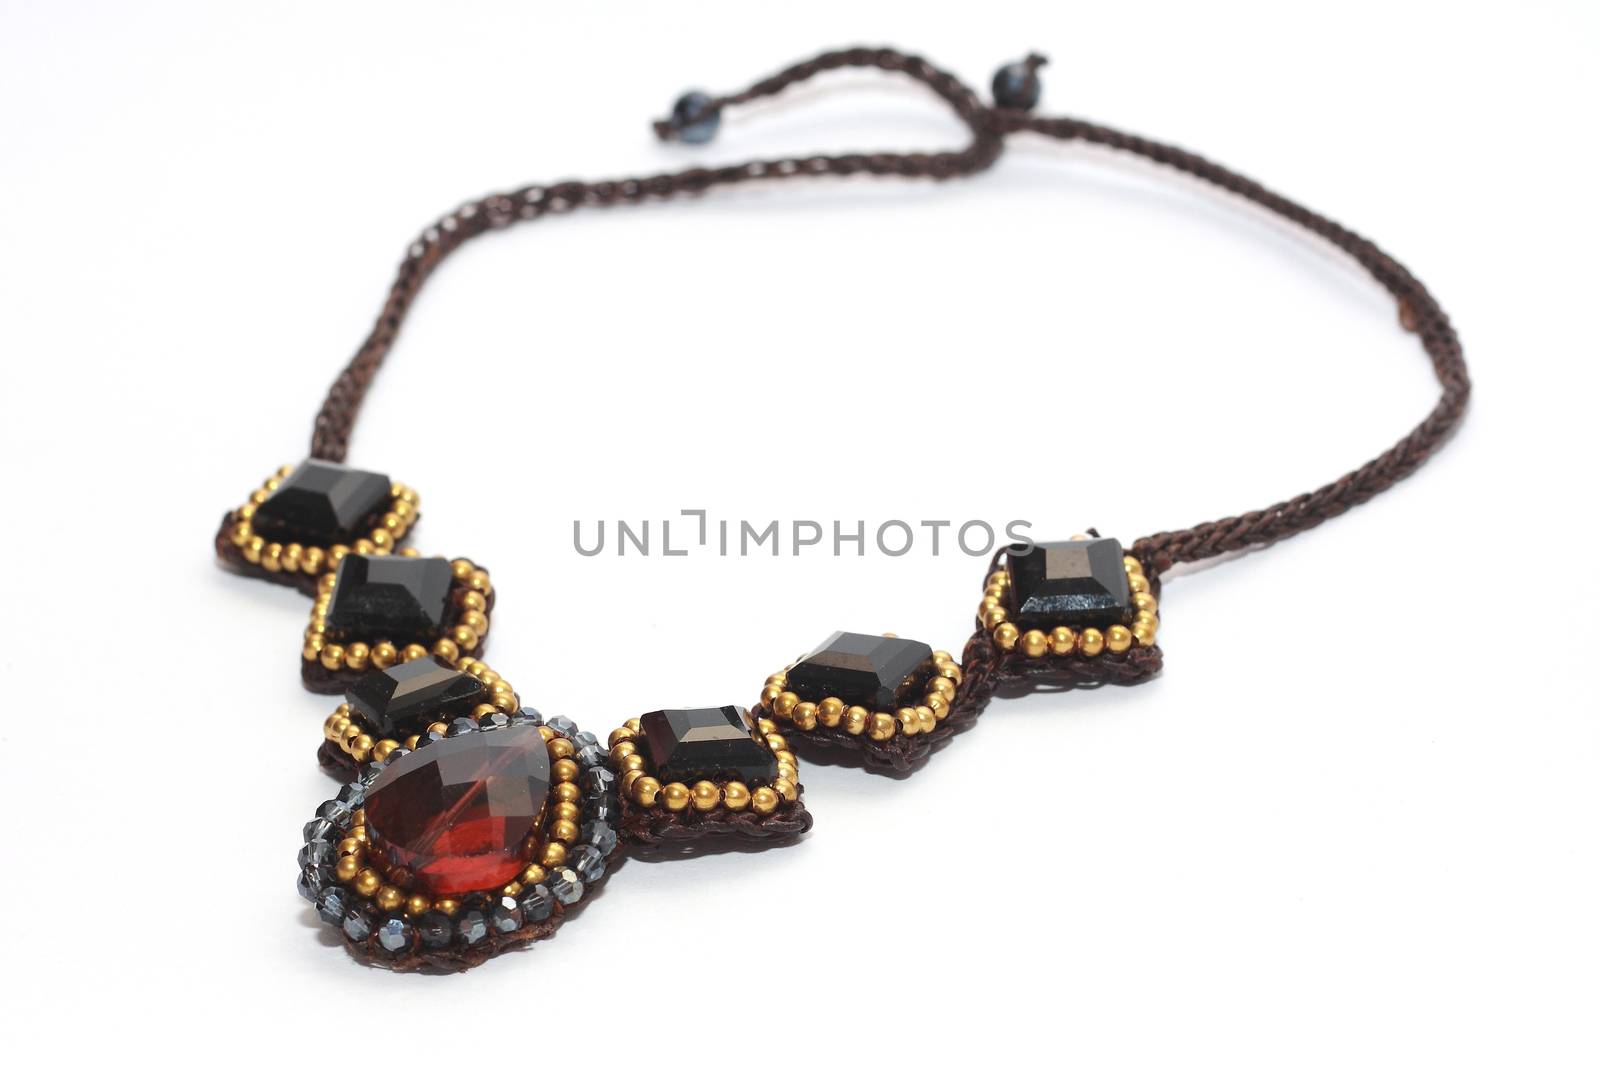 Luxury vintage style black crystal necklace isolated on white background.Personal fashion accessory design. selective focus